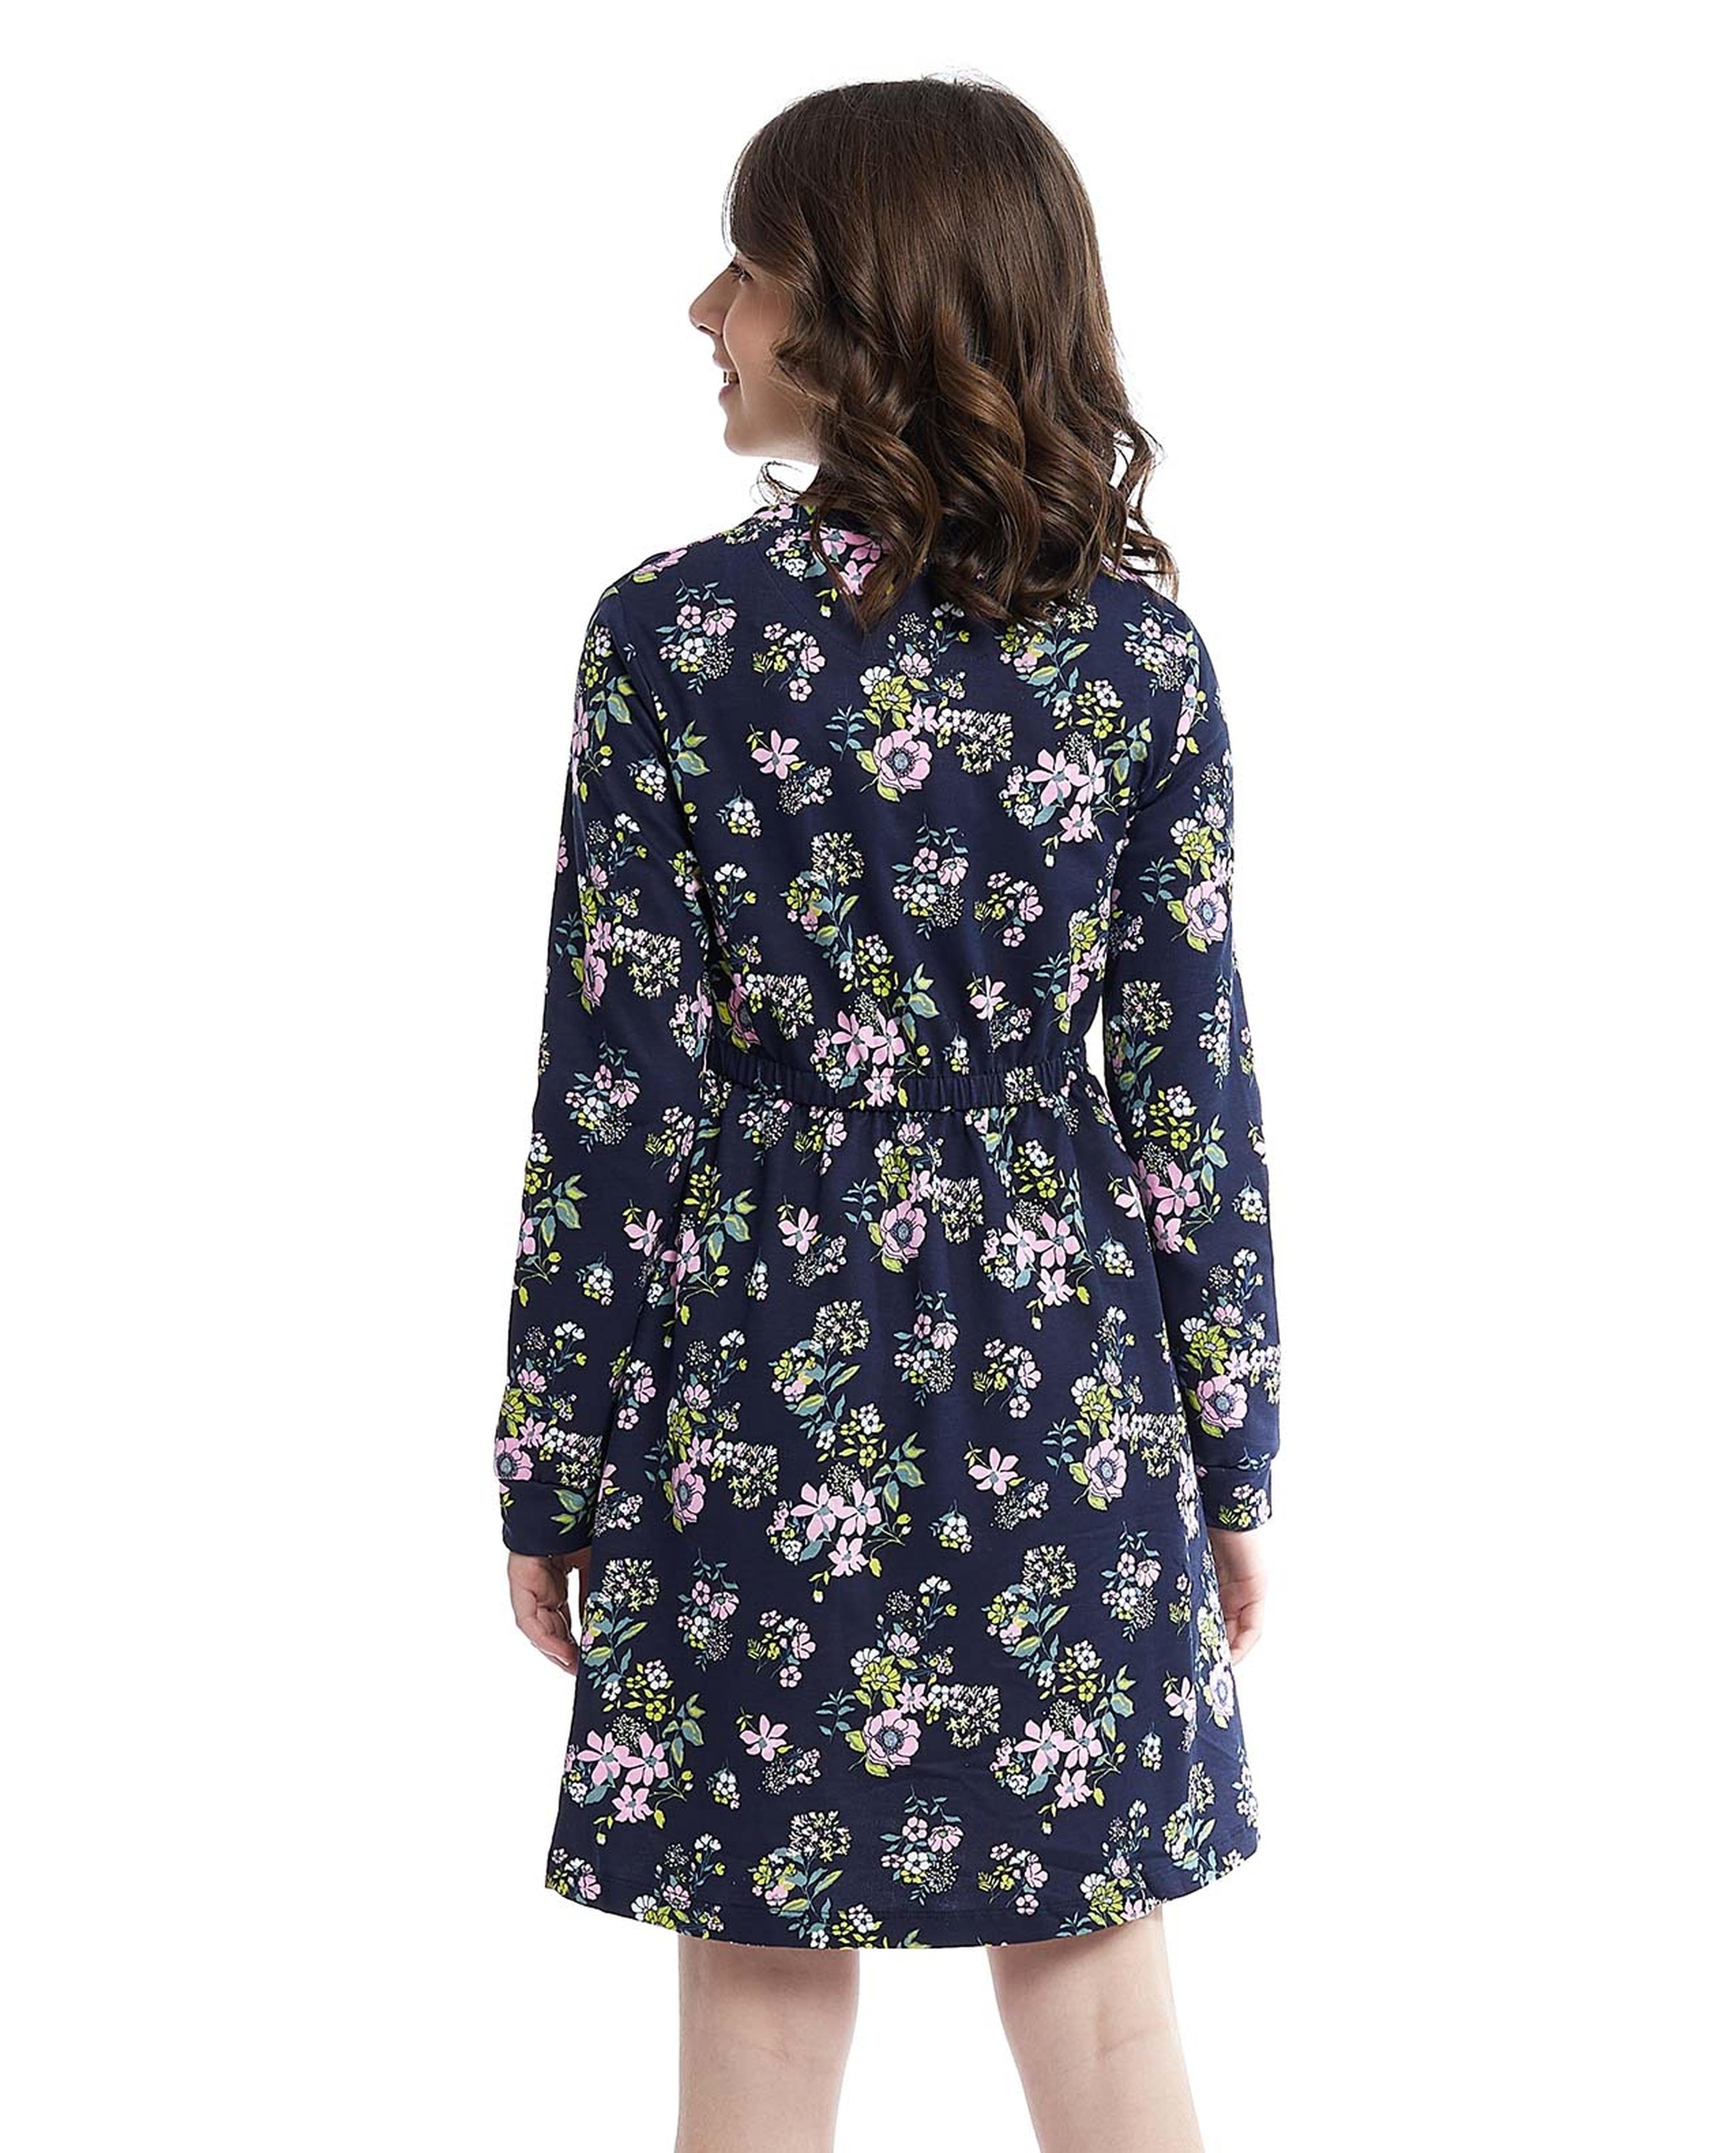 Floral Print Mini Dress with Long Sleeves